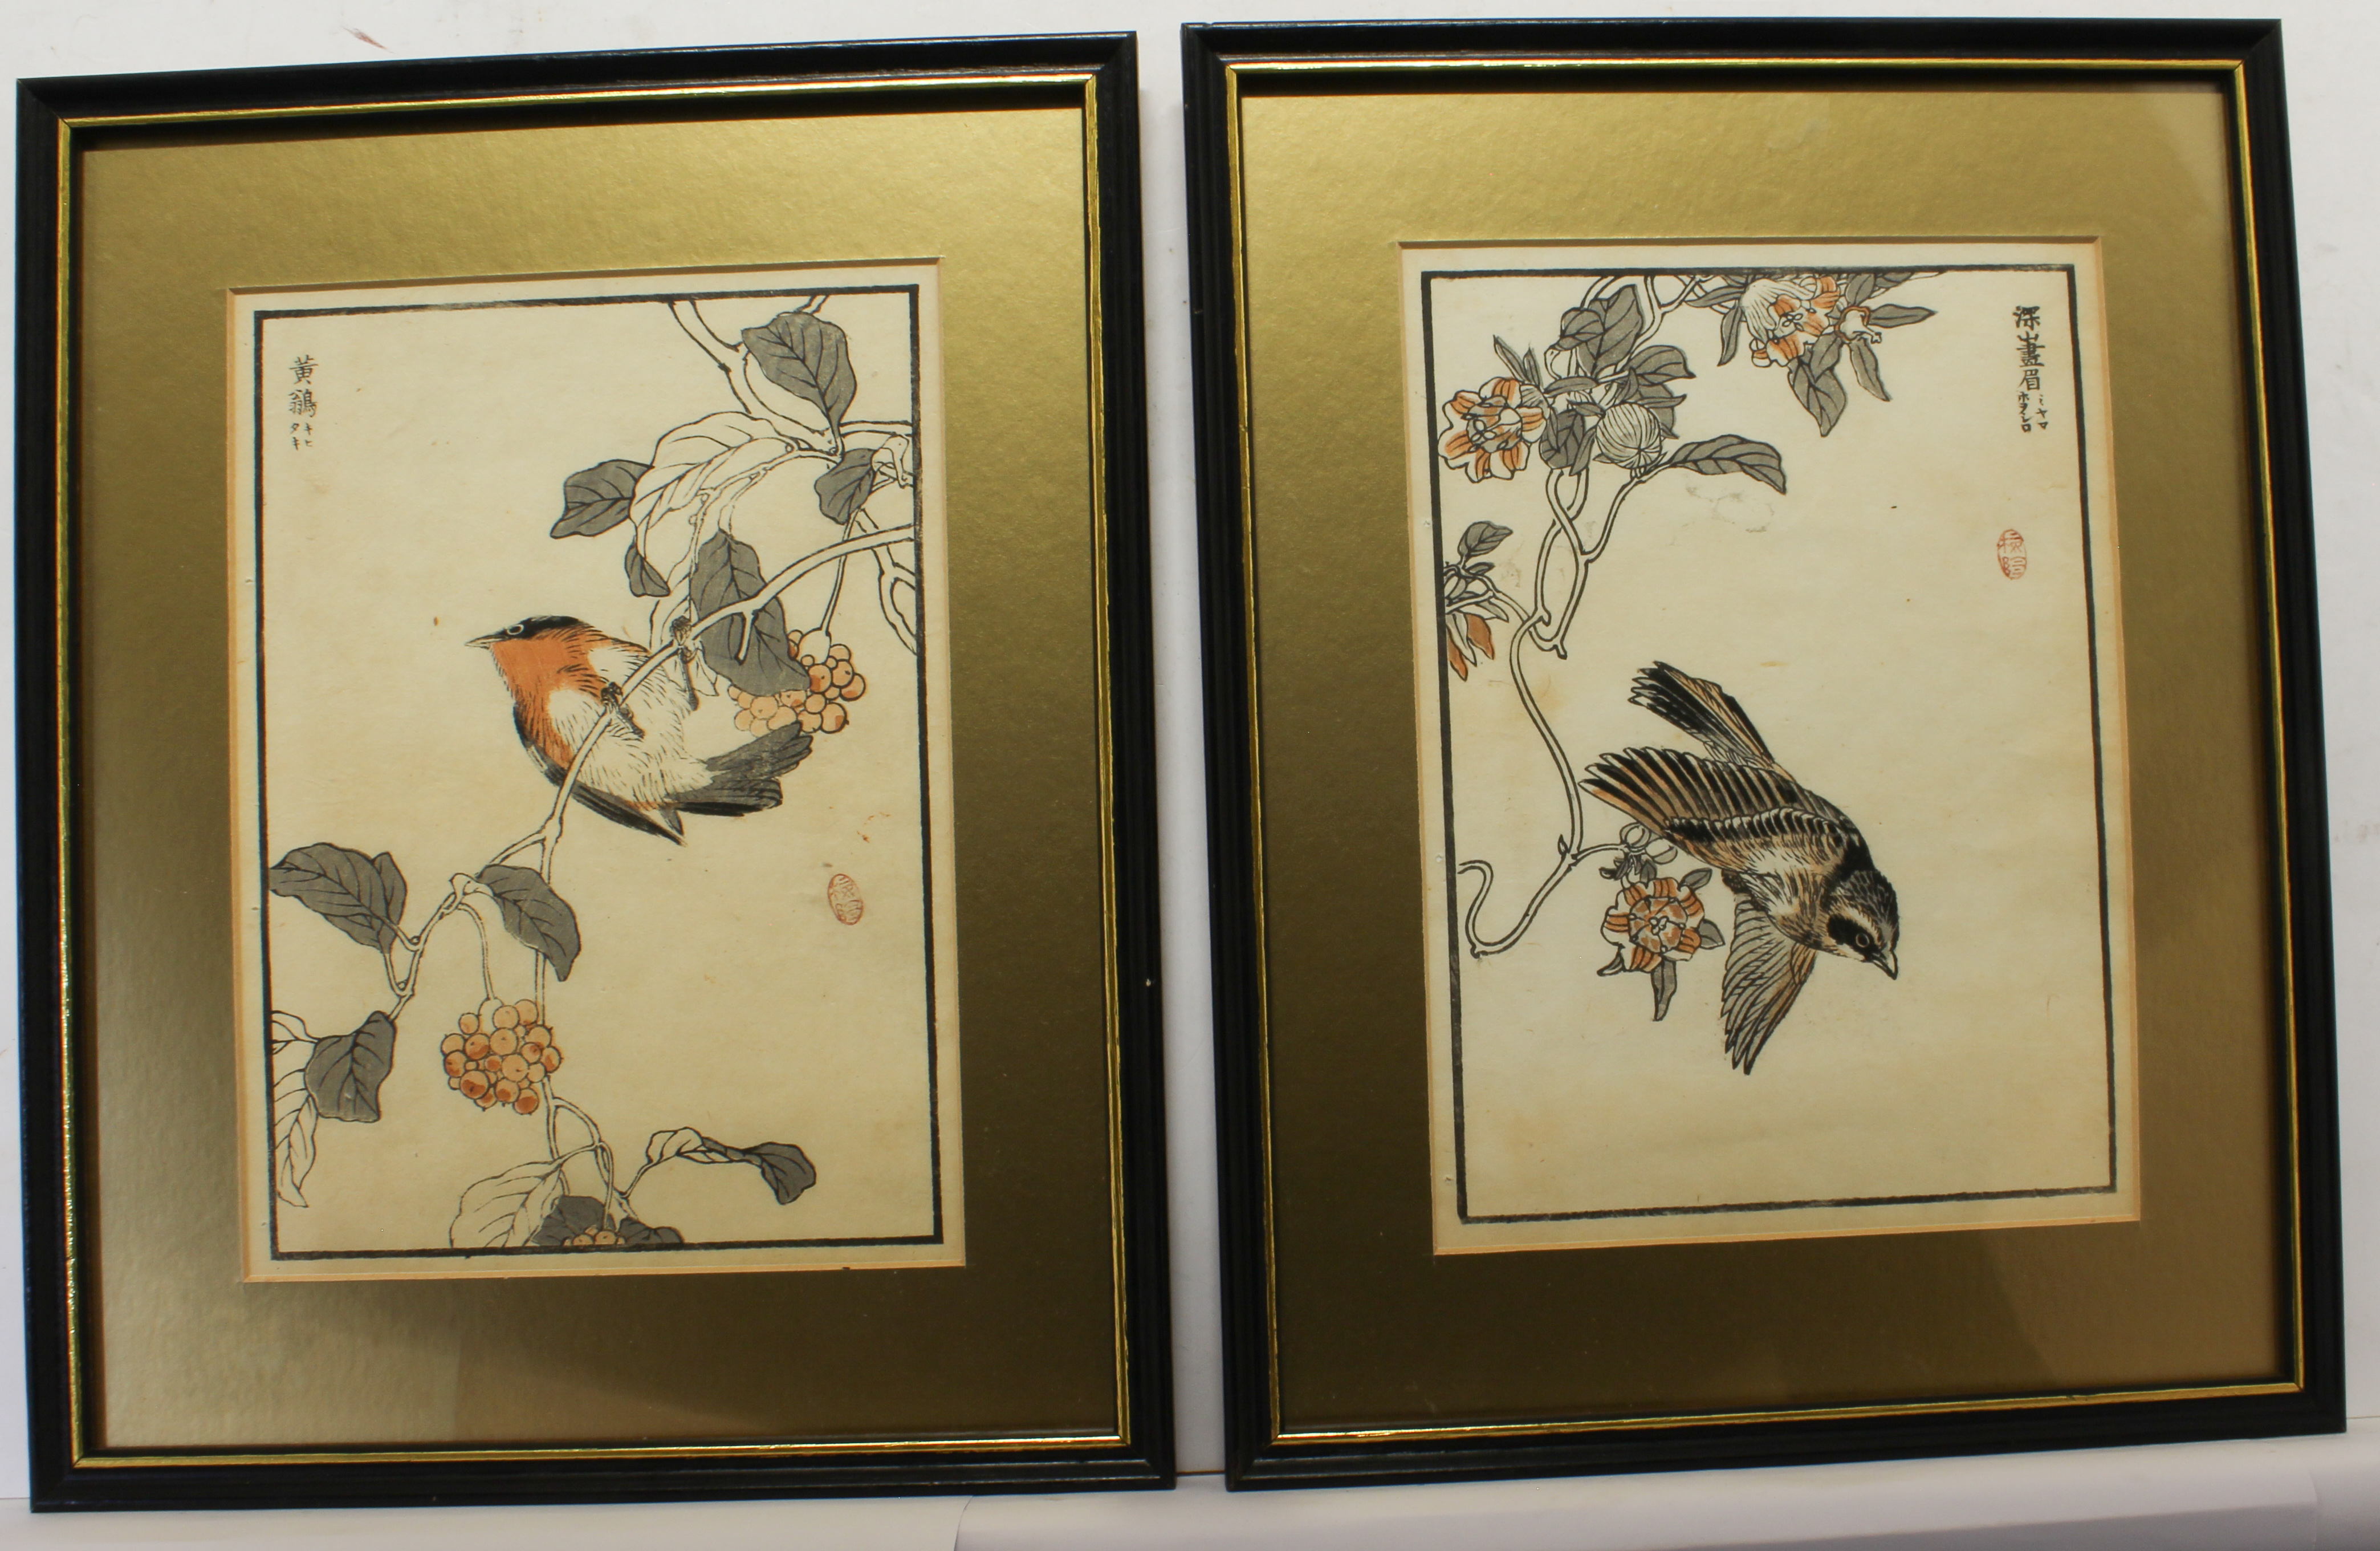 A Chinese watercolour on silk painting of two butterflies above peonies and chrysanthemums - - Image 3 of 3